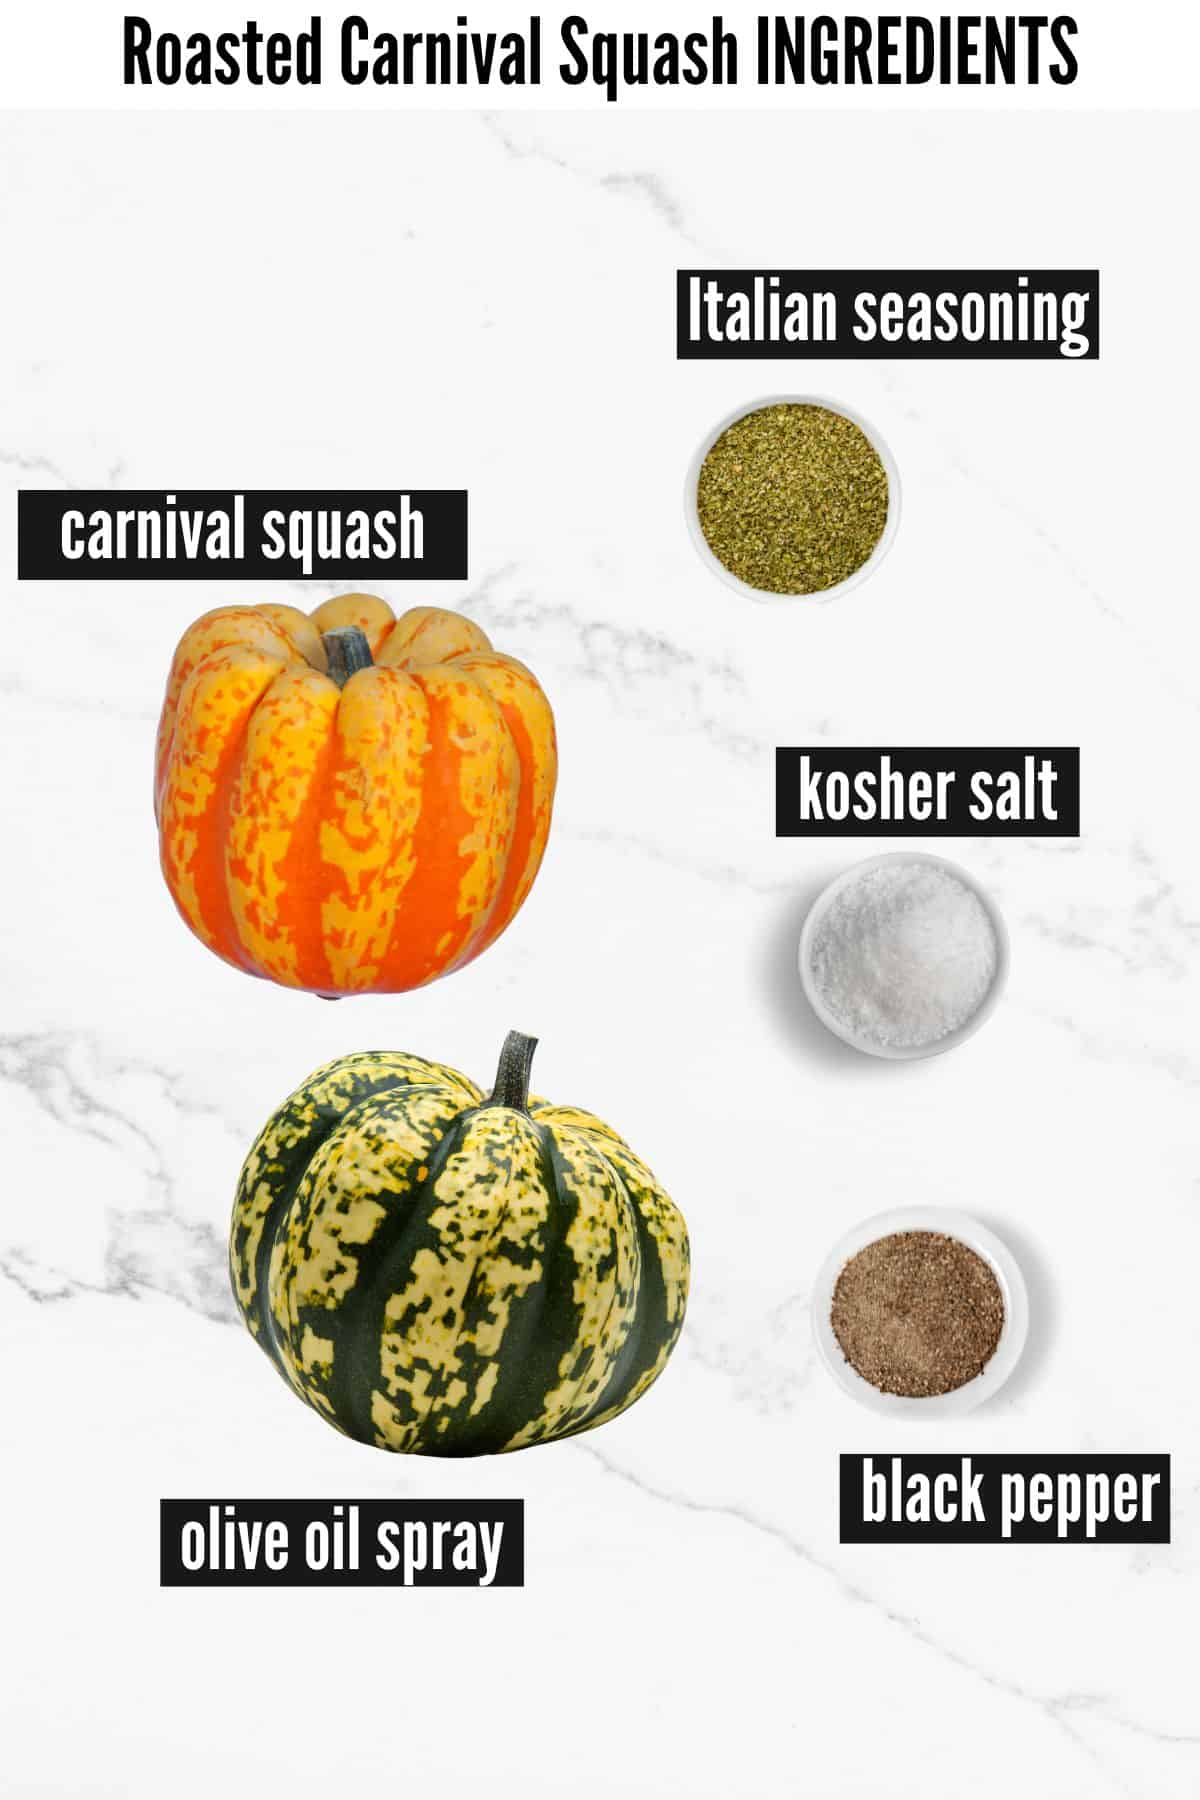 roasted carnival squash labelled ingredients.